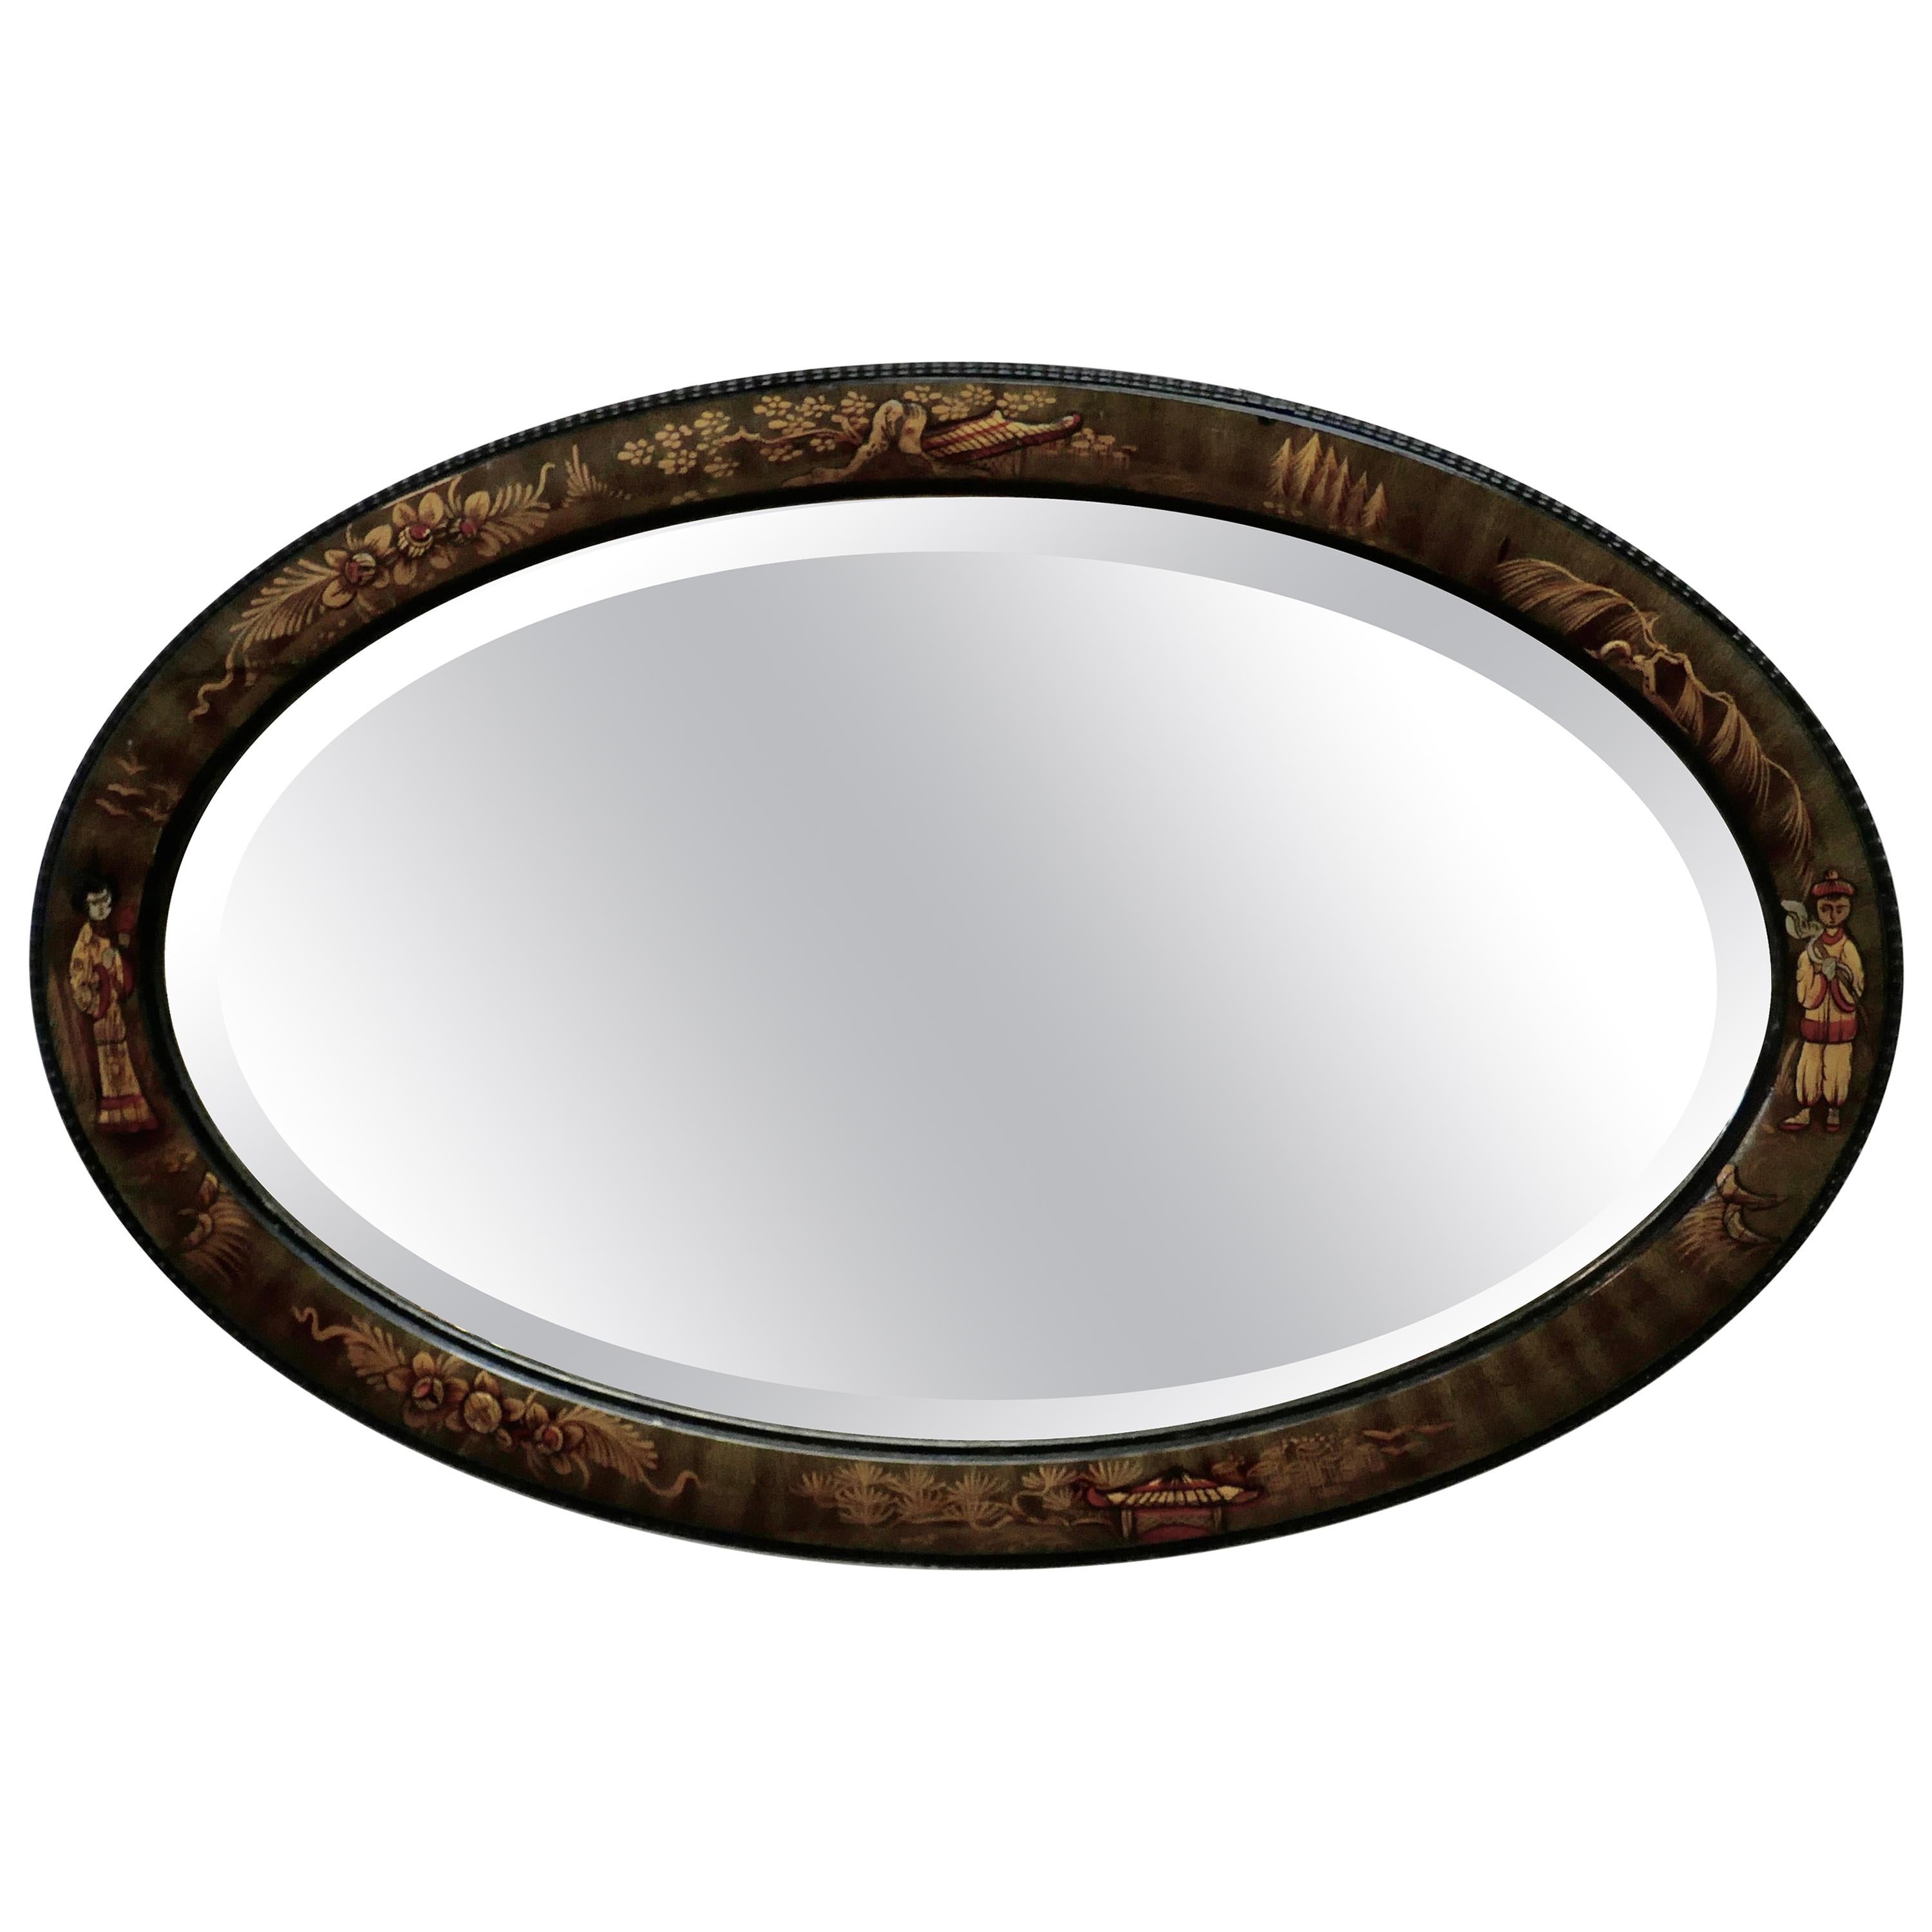 Black Lacquer Chinoiserie Oval Wall Mirror